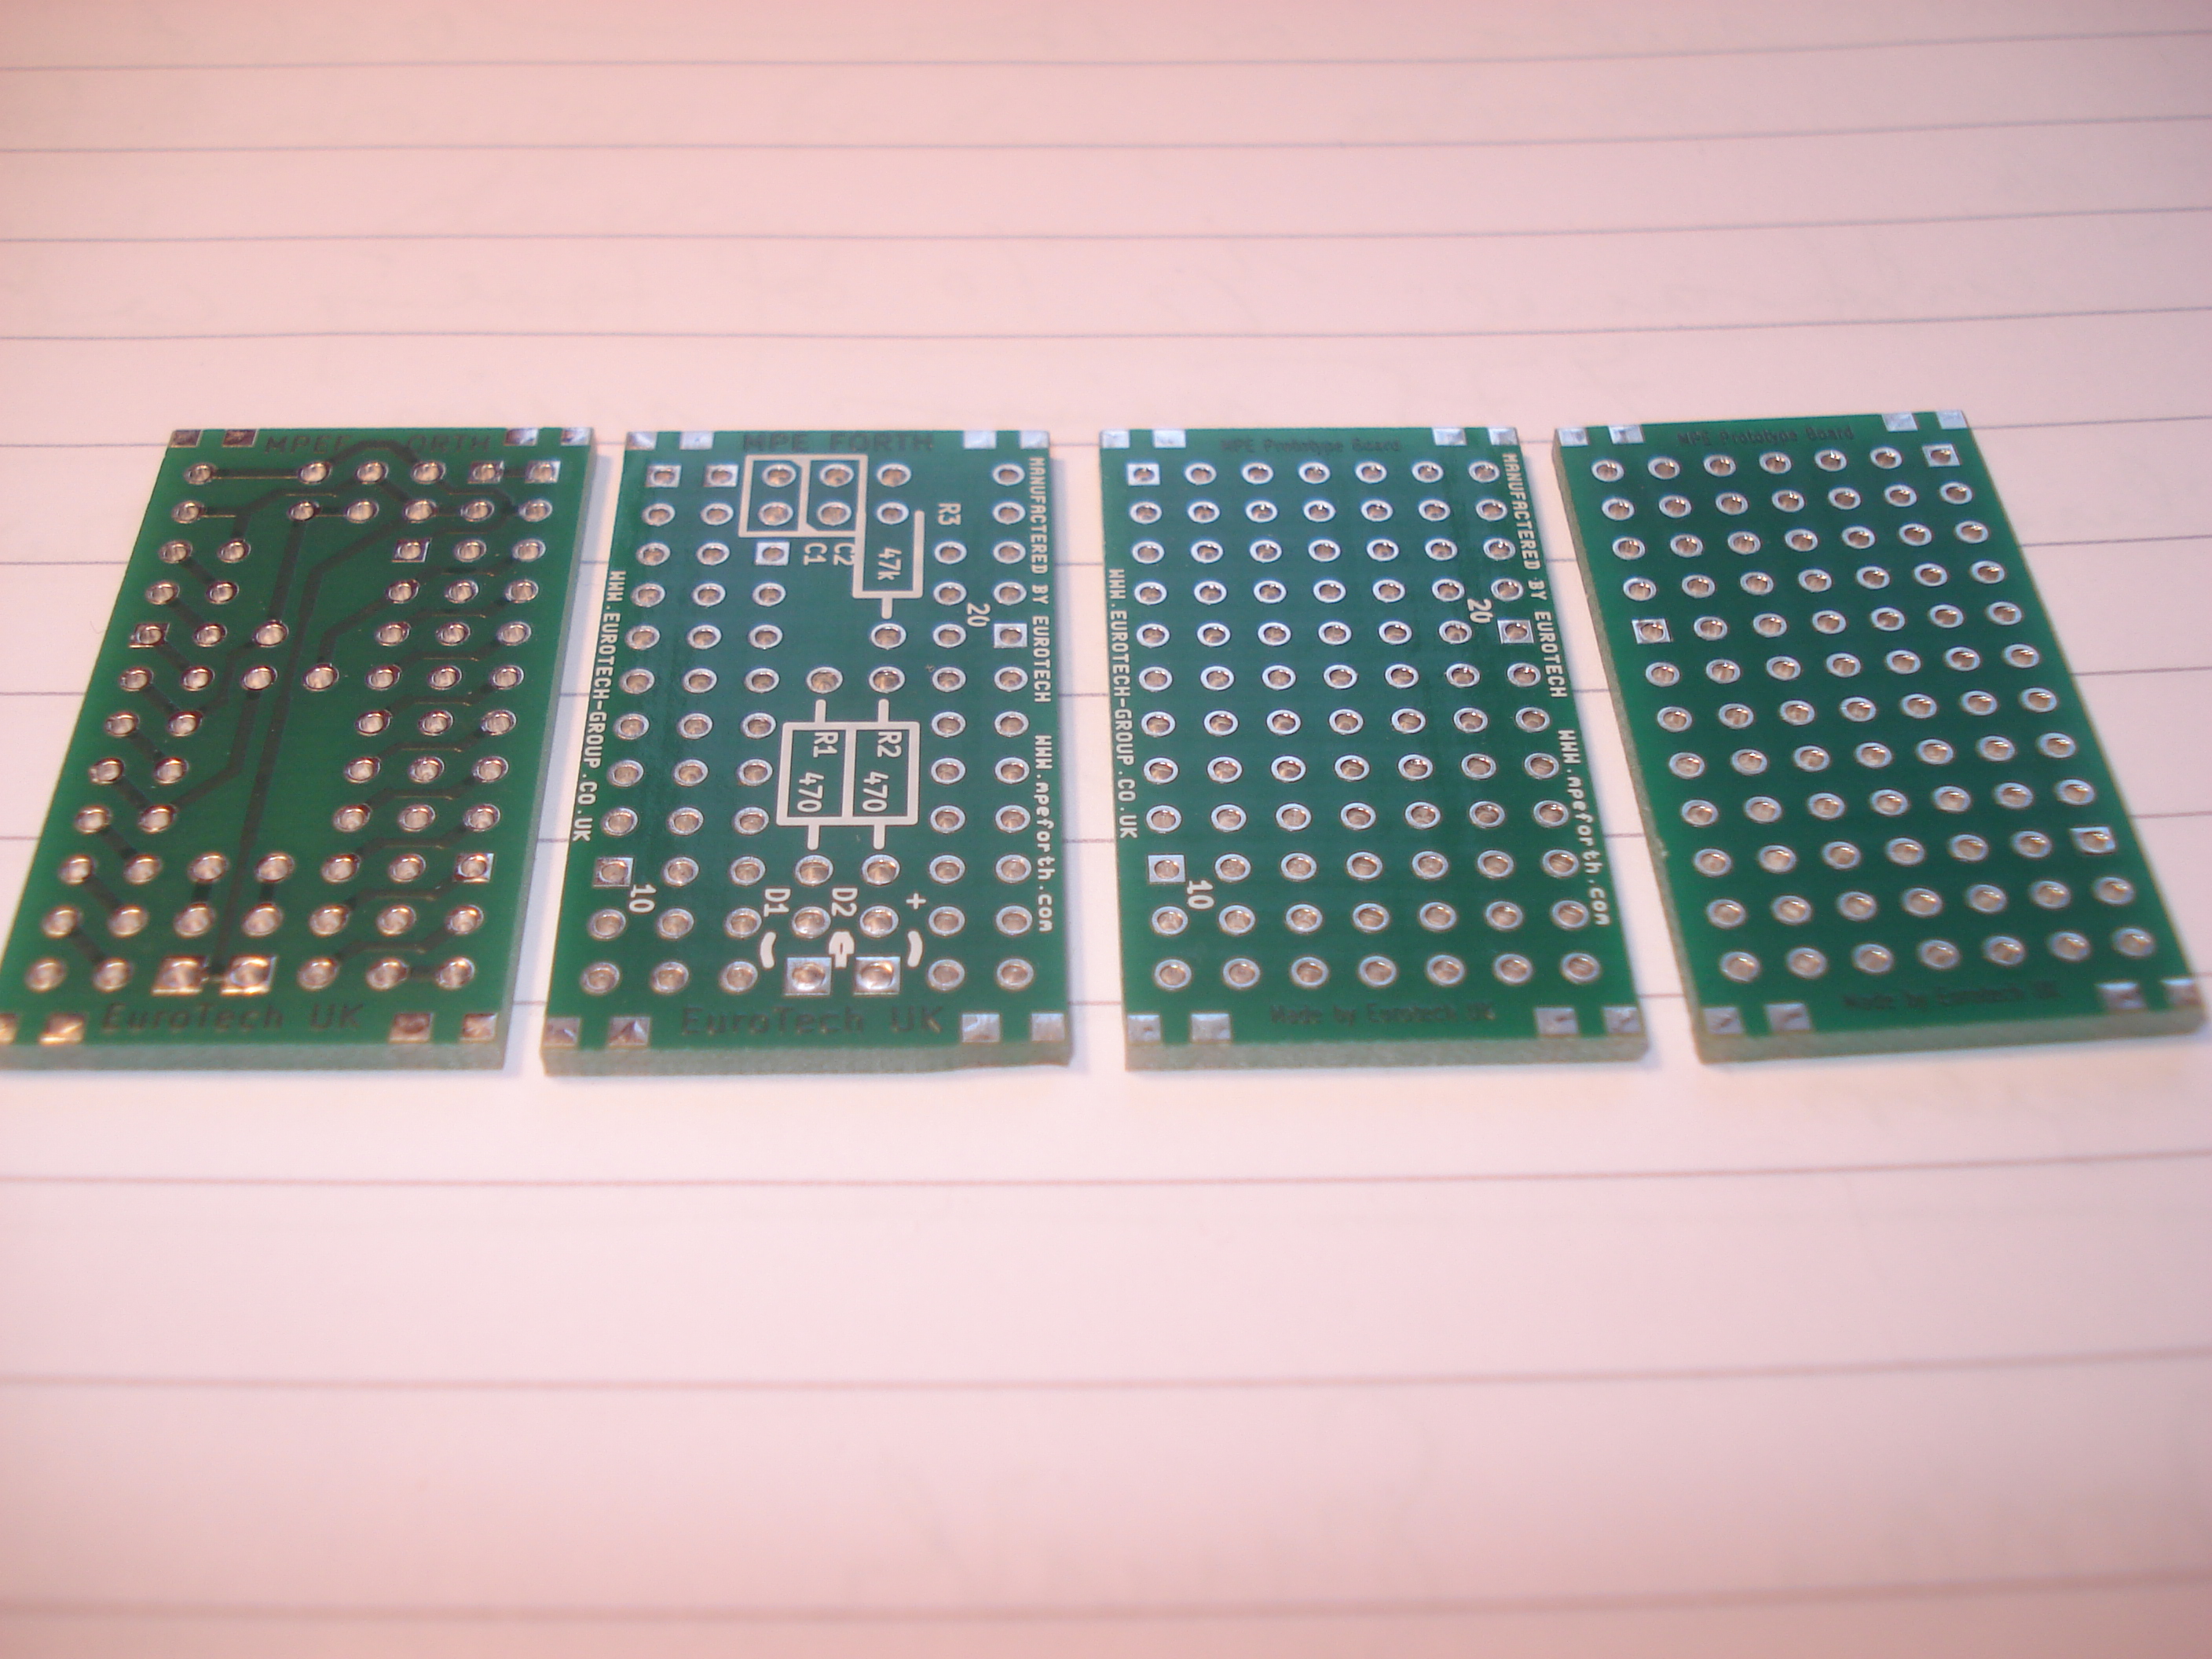 Left half: MiniPCBs – top and bottom side. Right half: The complementary experimental PCB to add additional parts.